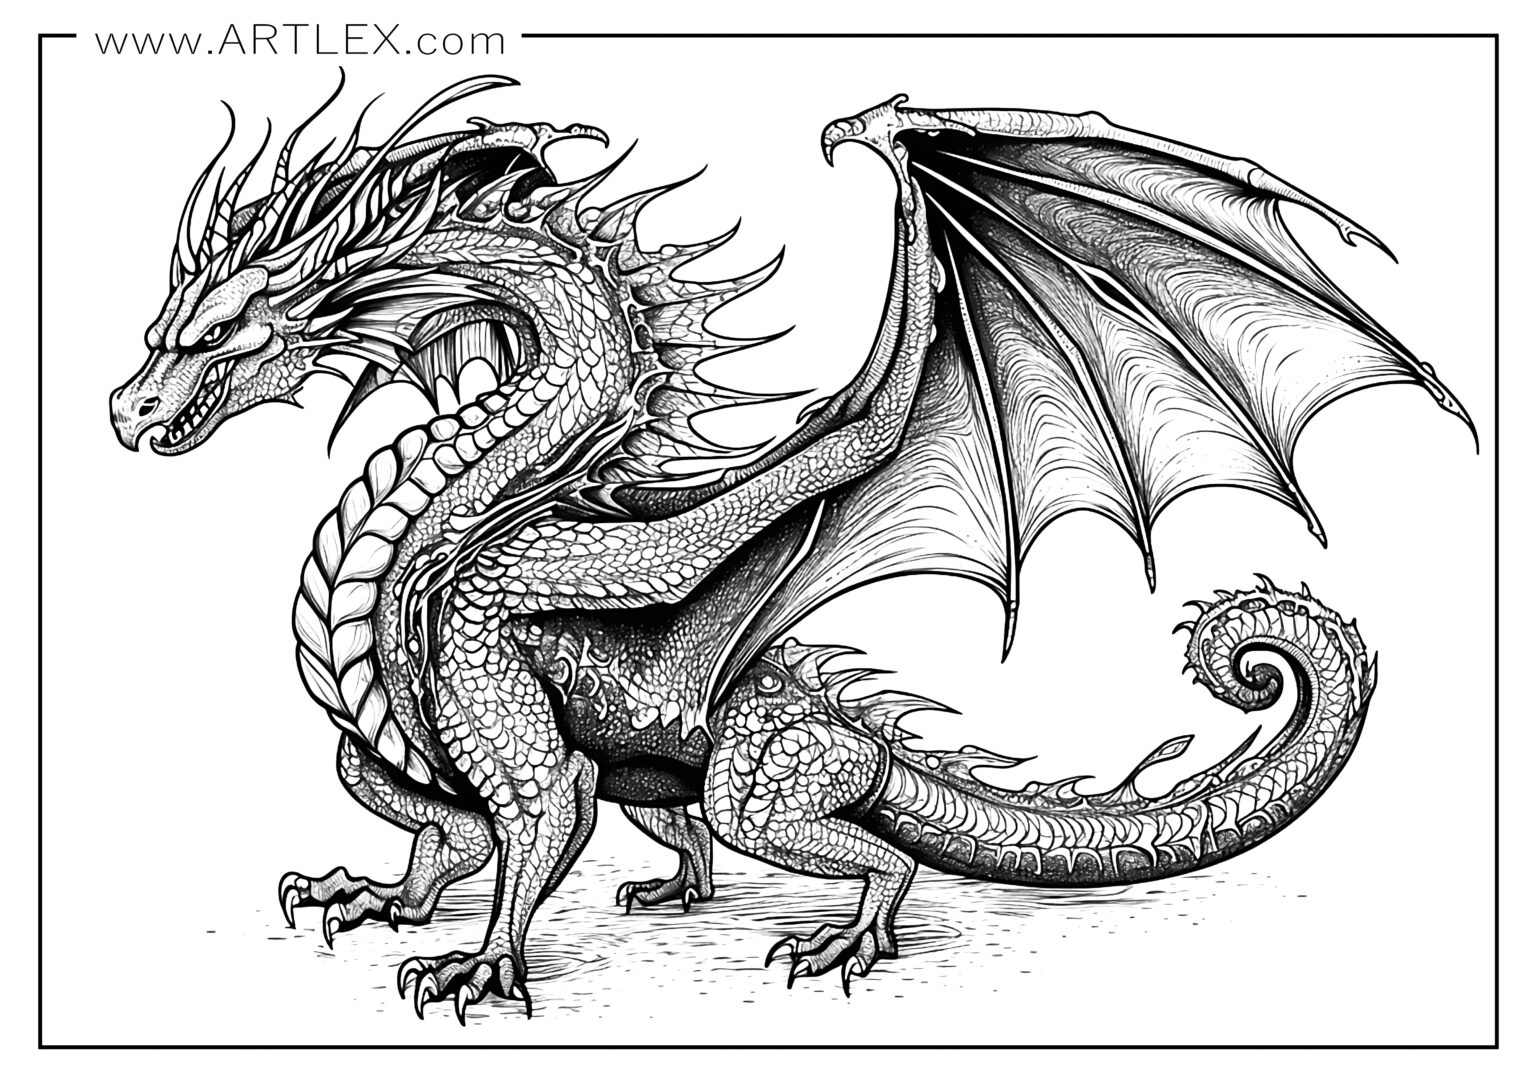 10 Free Dragon Coloring Pages (Free + Printable) – Artlex